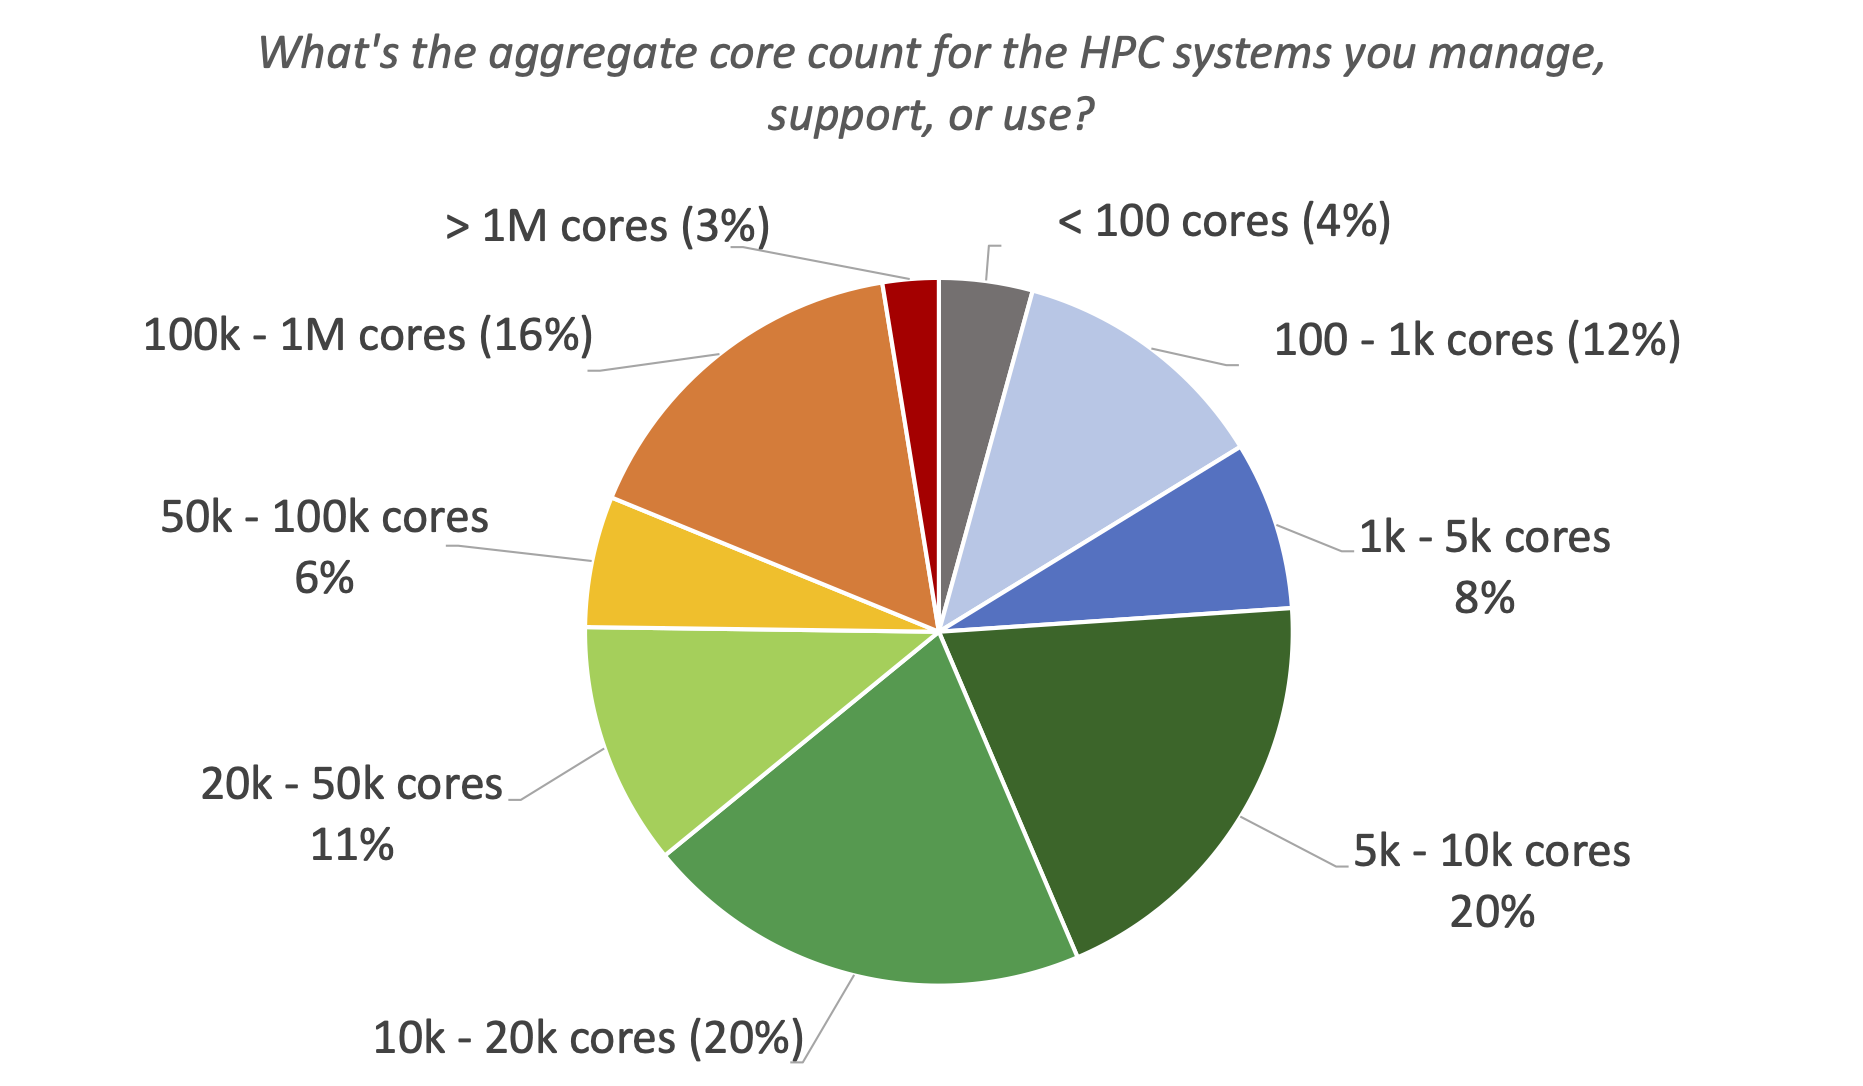 11. What's the aggregate core count for the HPC systems you manage, support, or use?